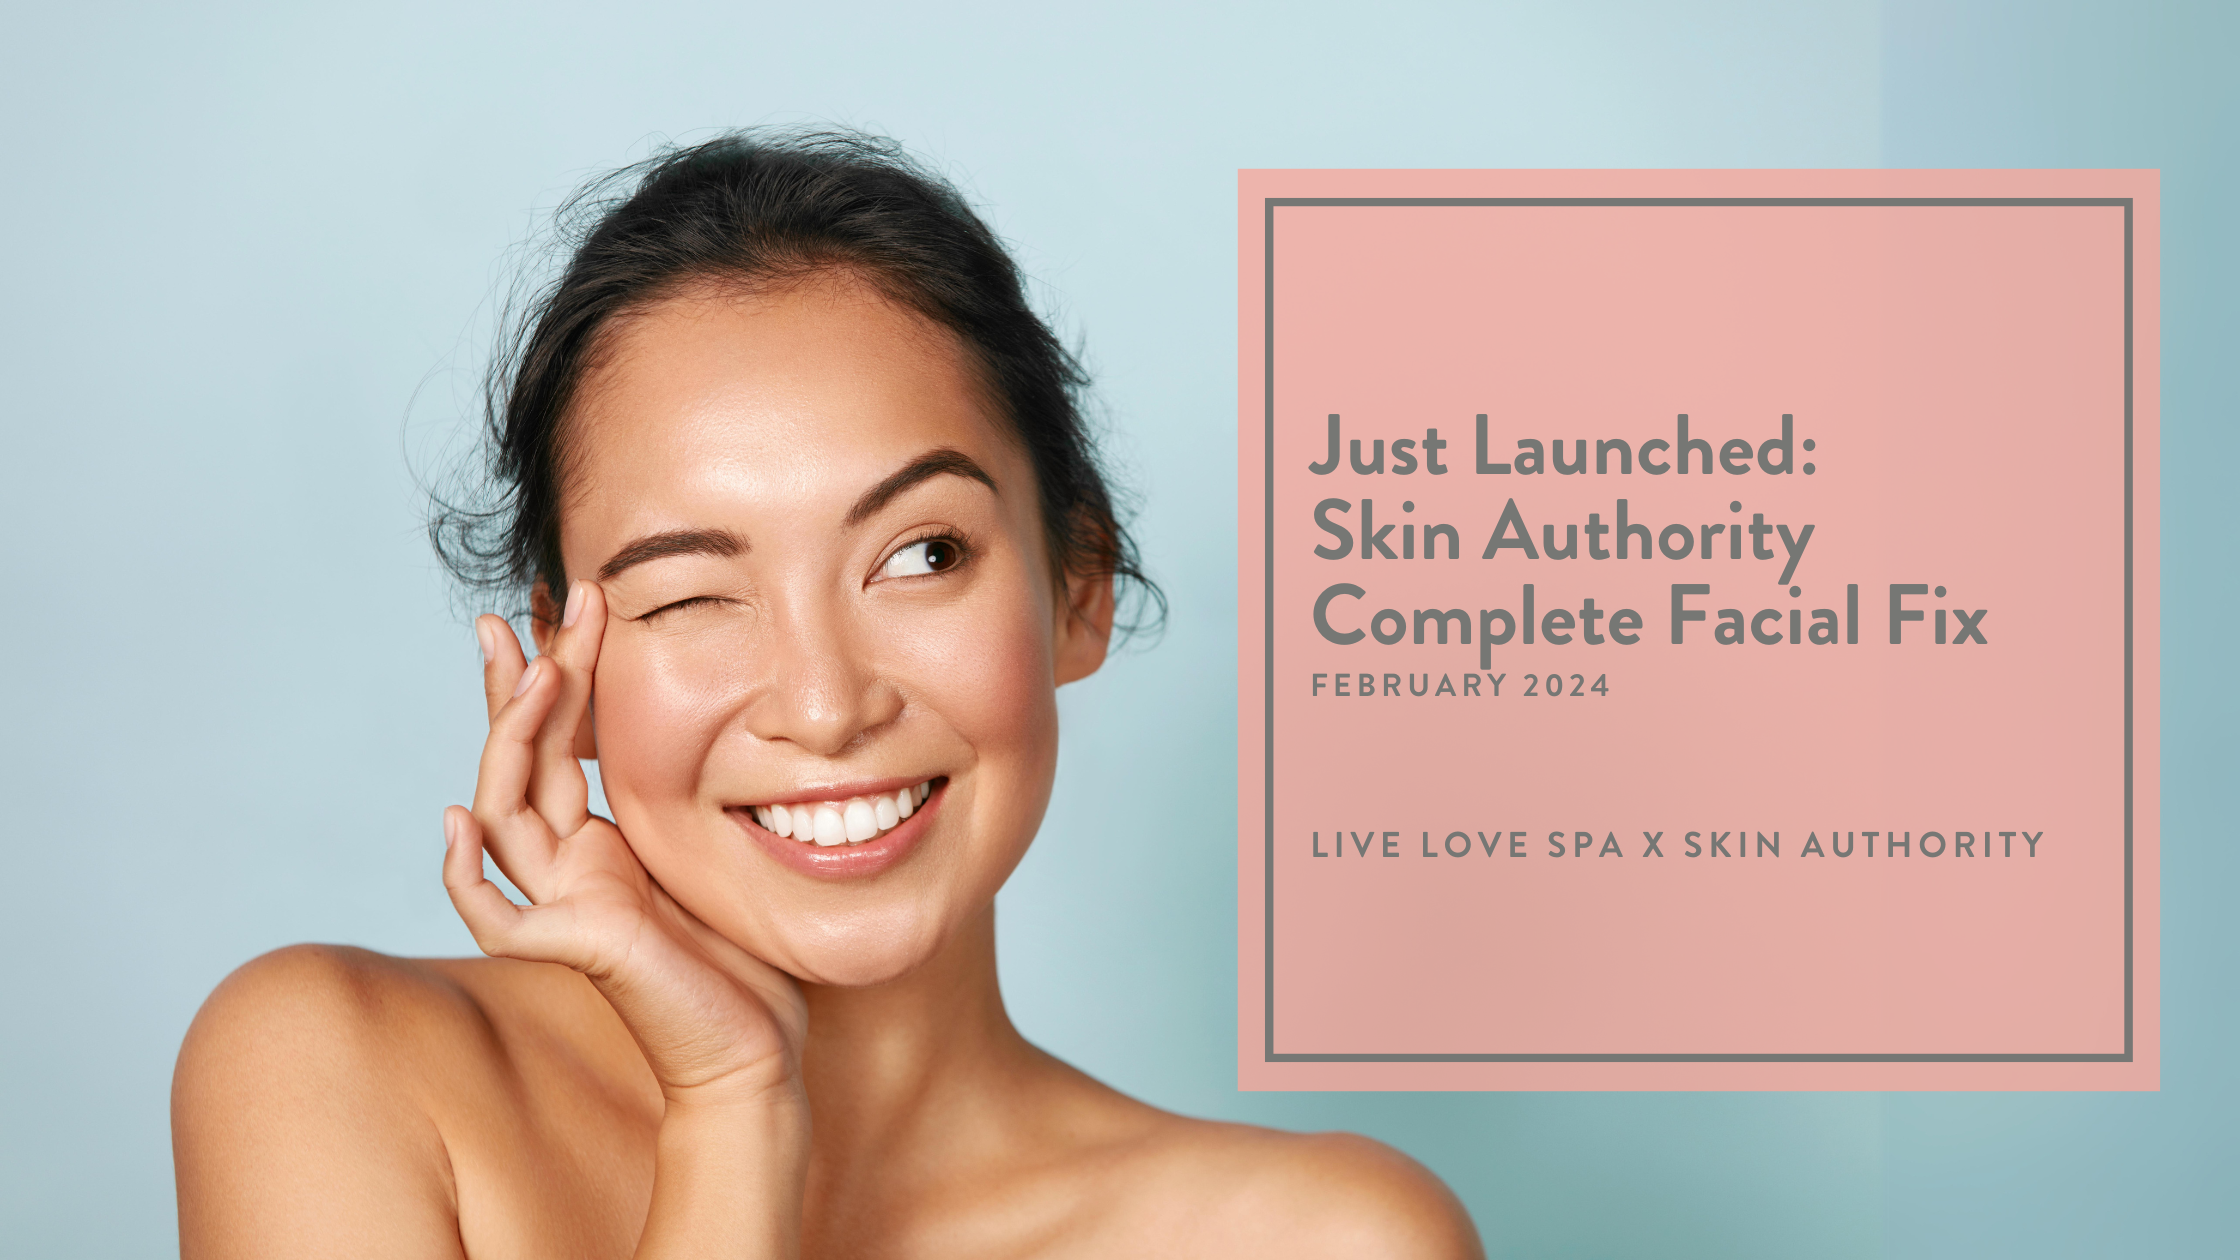 Just Launched: Skin Authority Complete Facial Fix